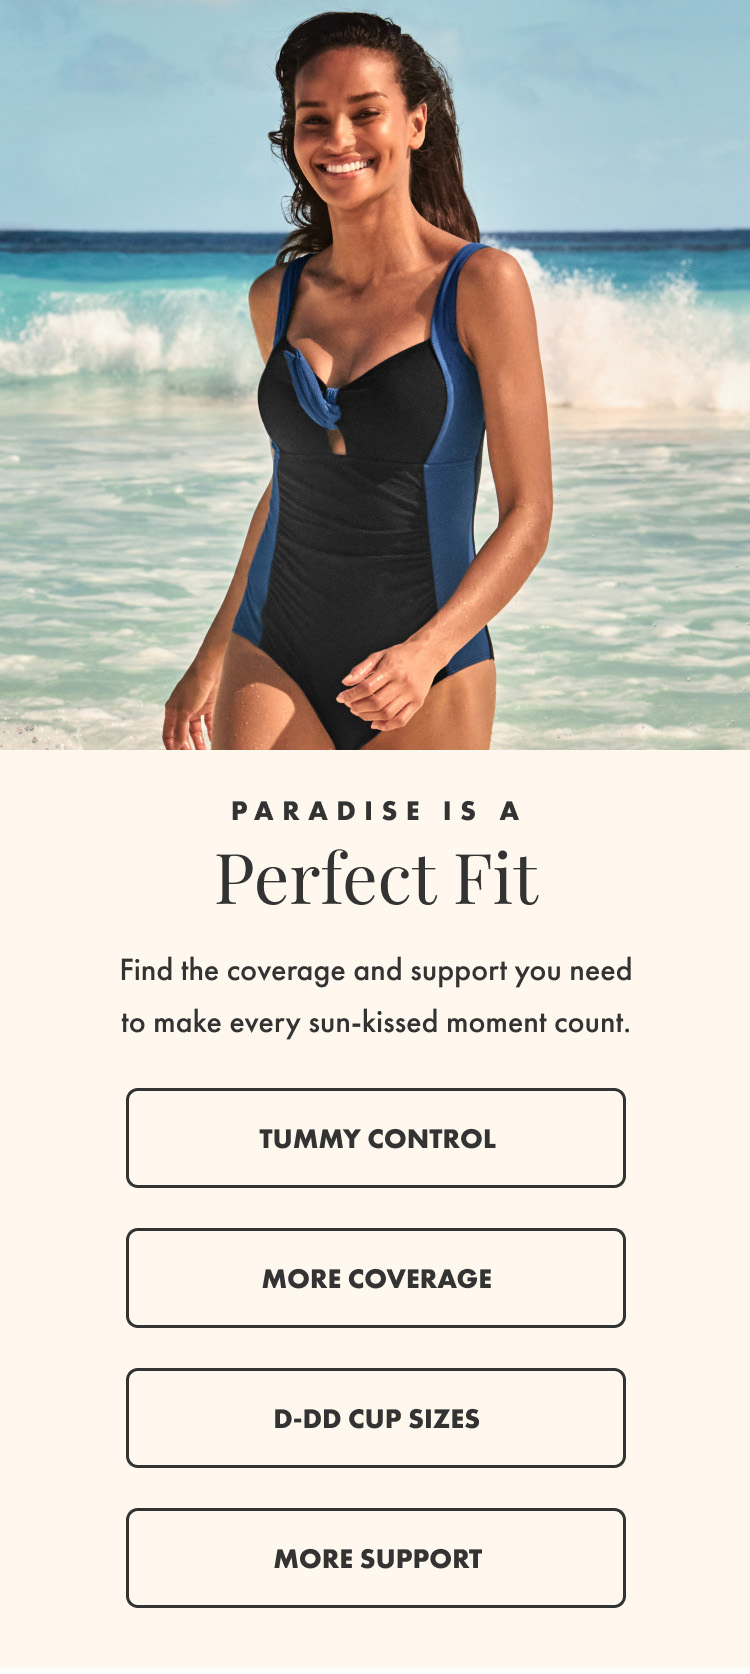 Paradise Is A Perfect Fit - Tummy Control, More Coverage, D-DD Cup Sizes & More Support